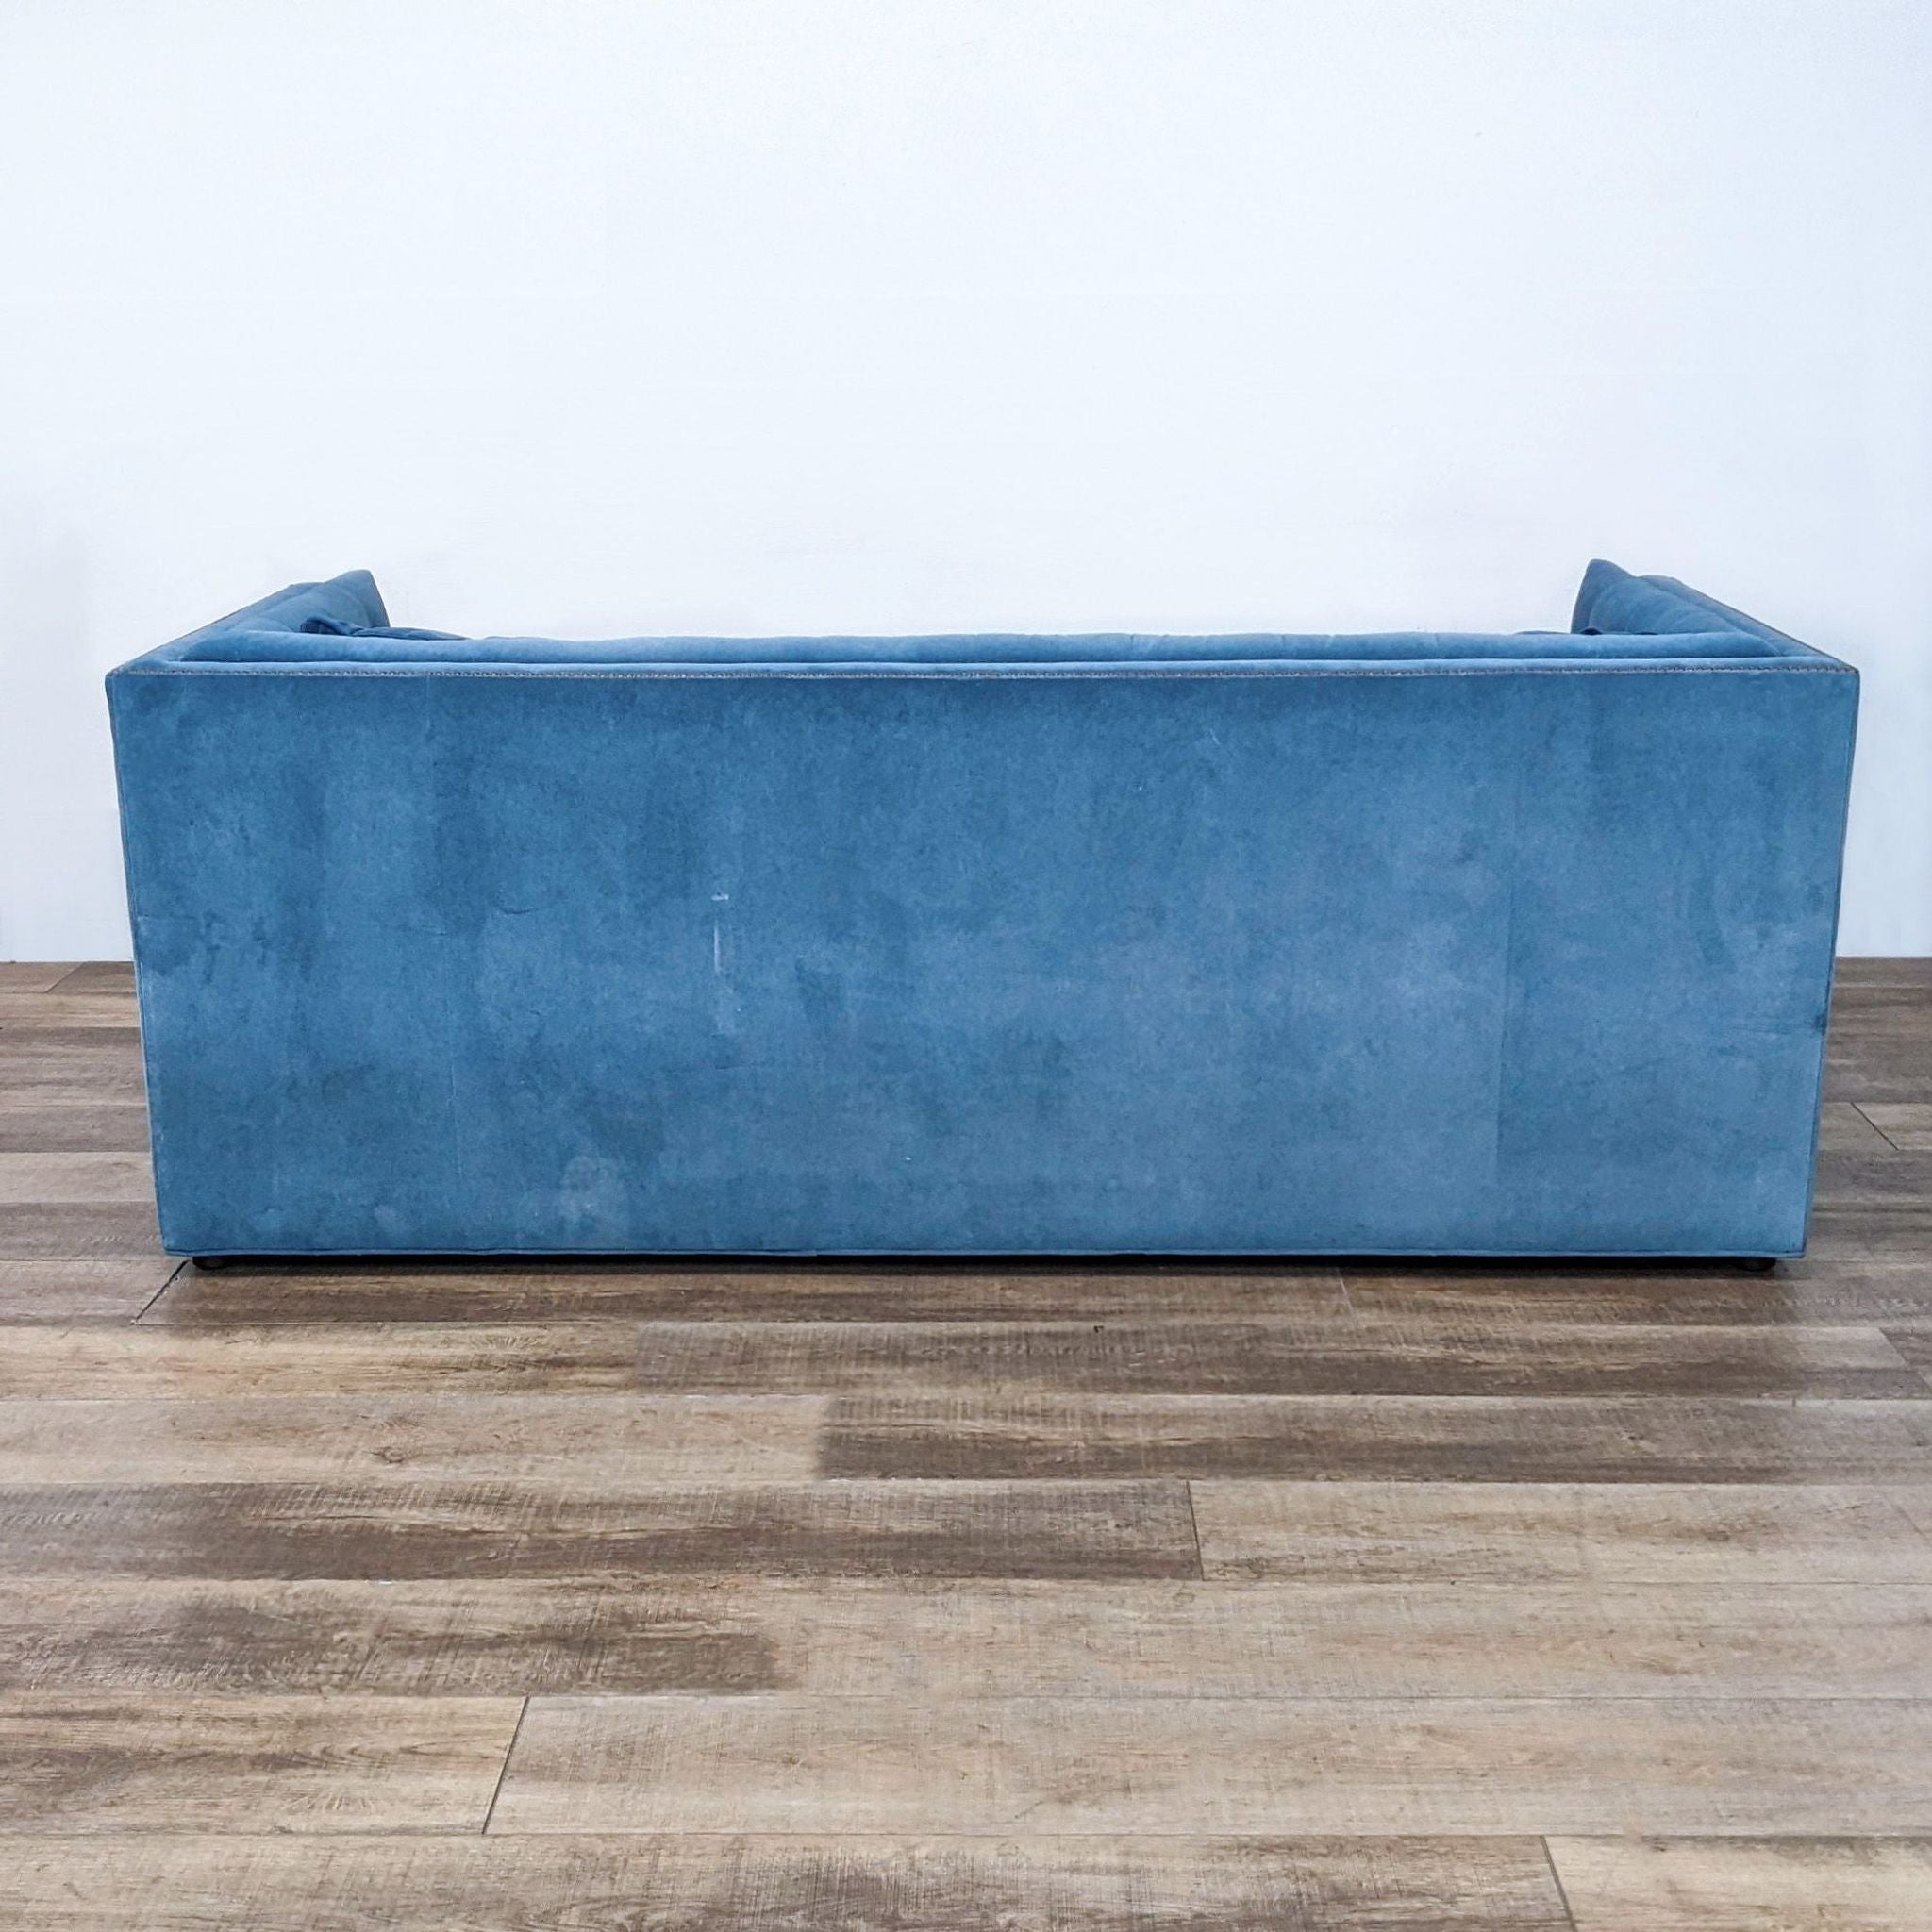 Side view of a blue Bassett 3-seat sofa showcasing its tufted shelter arms and gold nail head trim on a wooden floor.